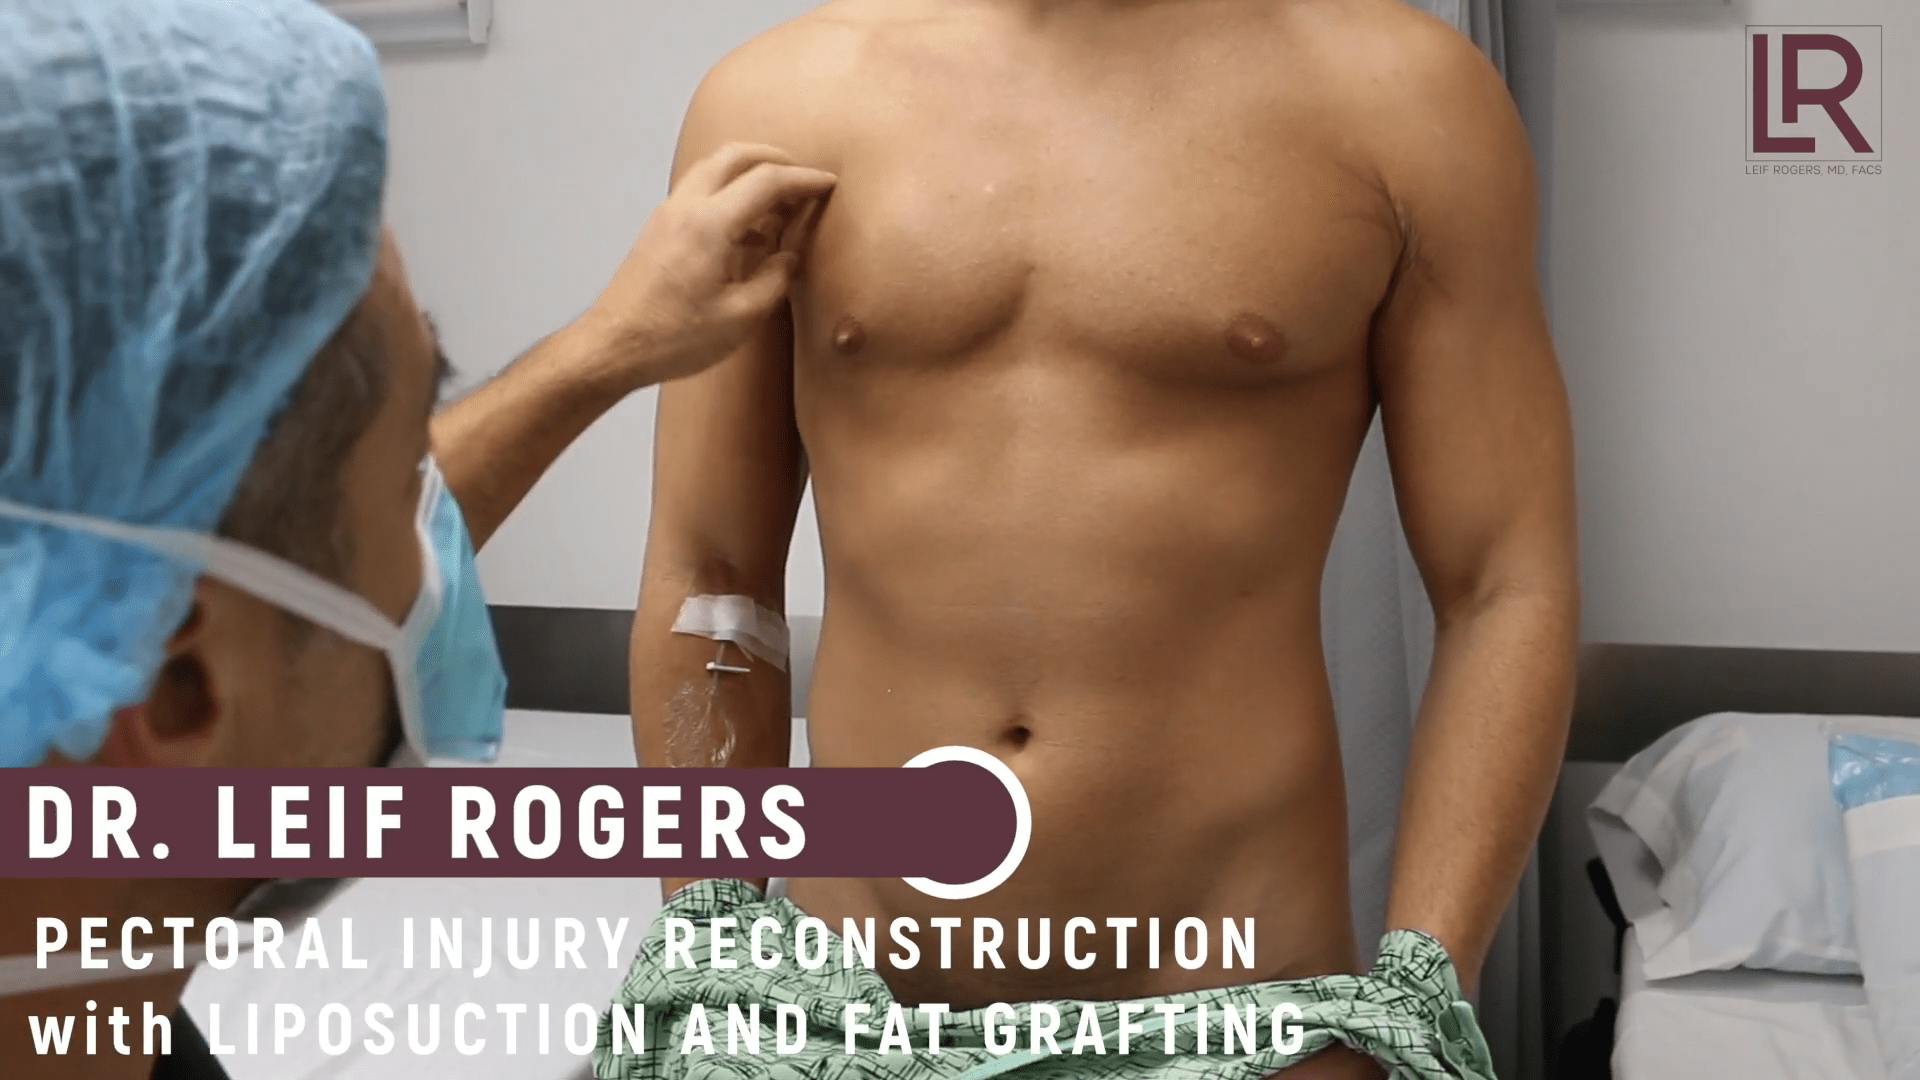 Dr. Leif Rogers meeting with patient for pectoral implants